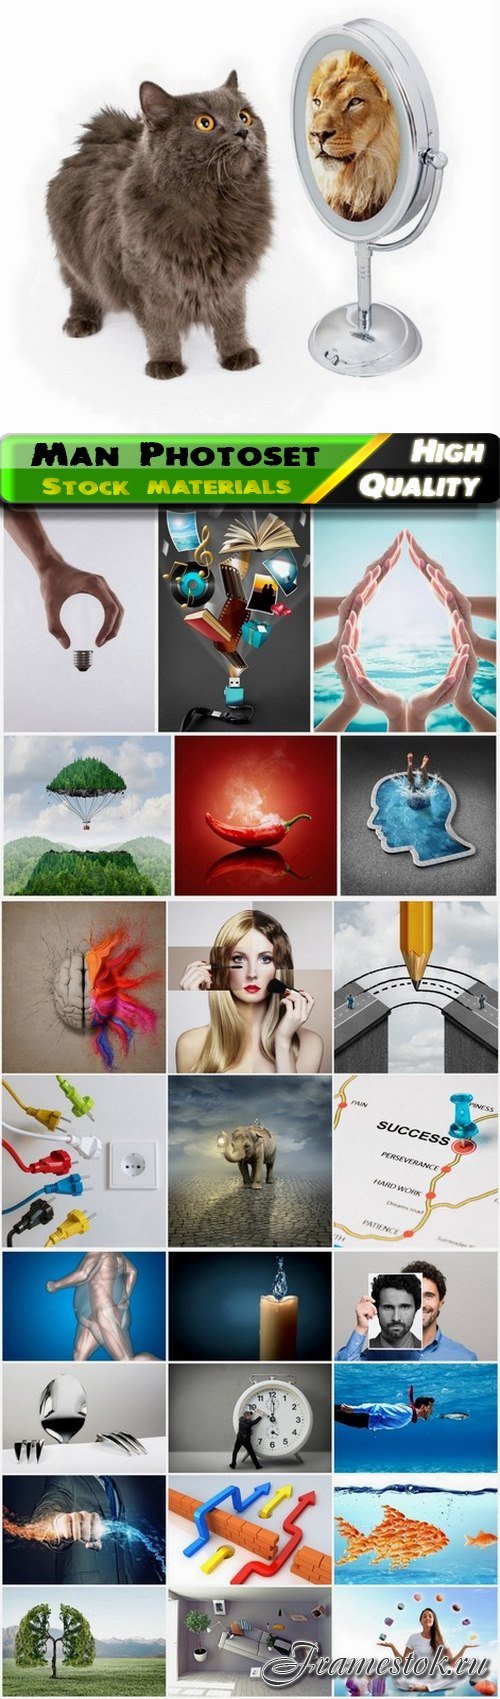 Interesting conceptual and creative images - 25 HQ Jpg